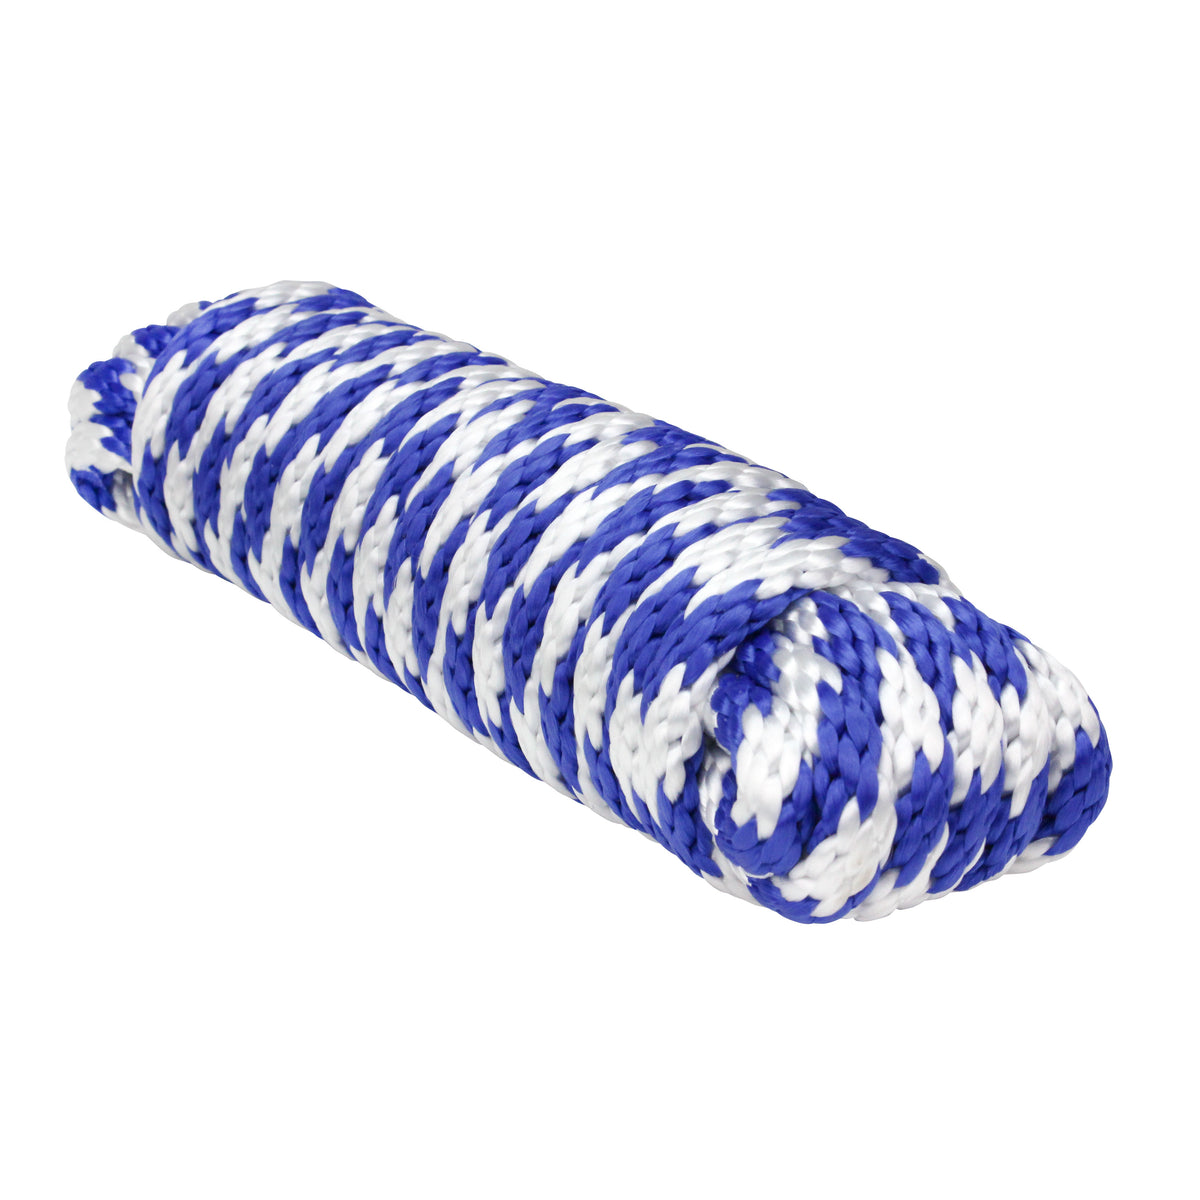 Extreme Max 3008.0214 Solid Braid MFP Utility Rope - 3/8" x 100', Blue/White